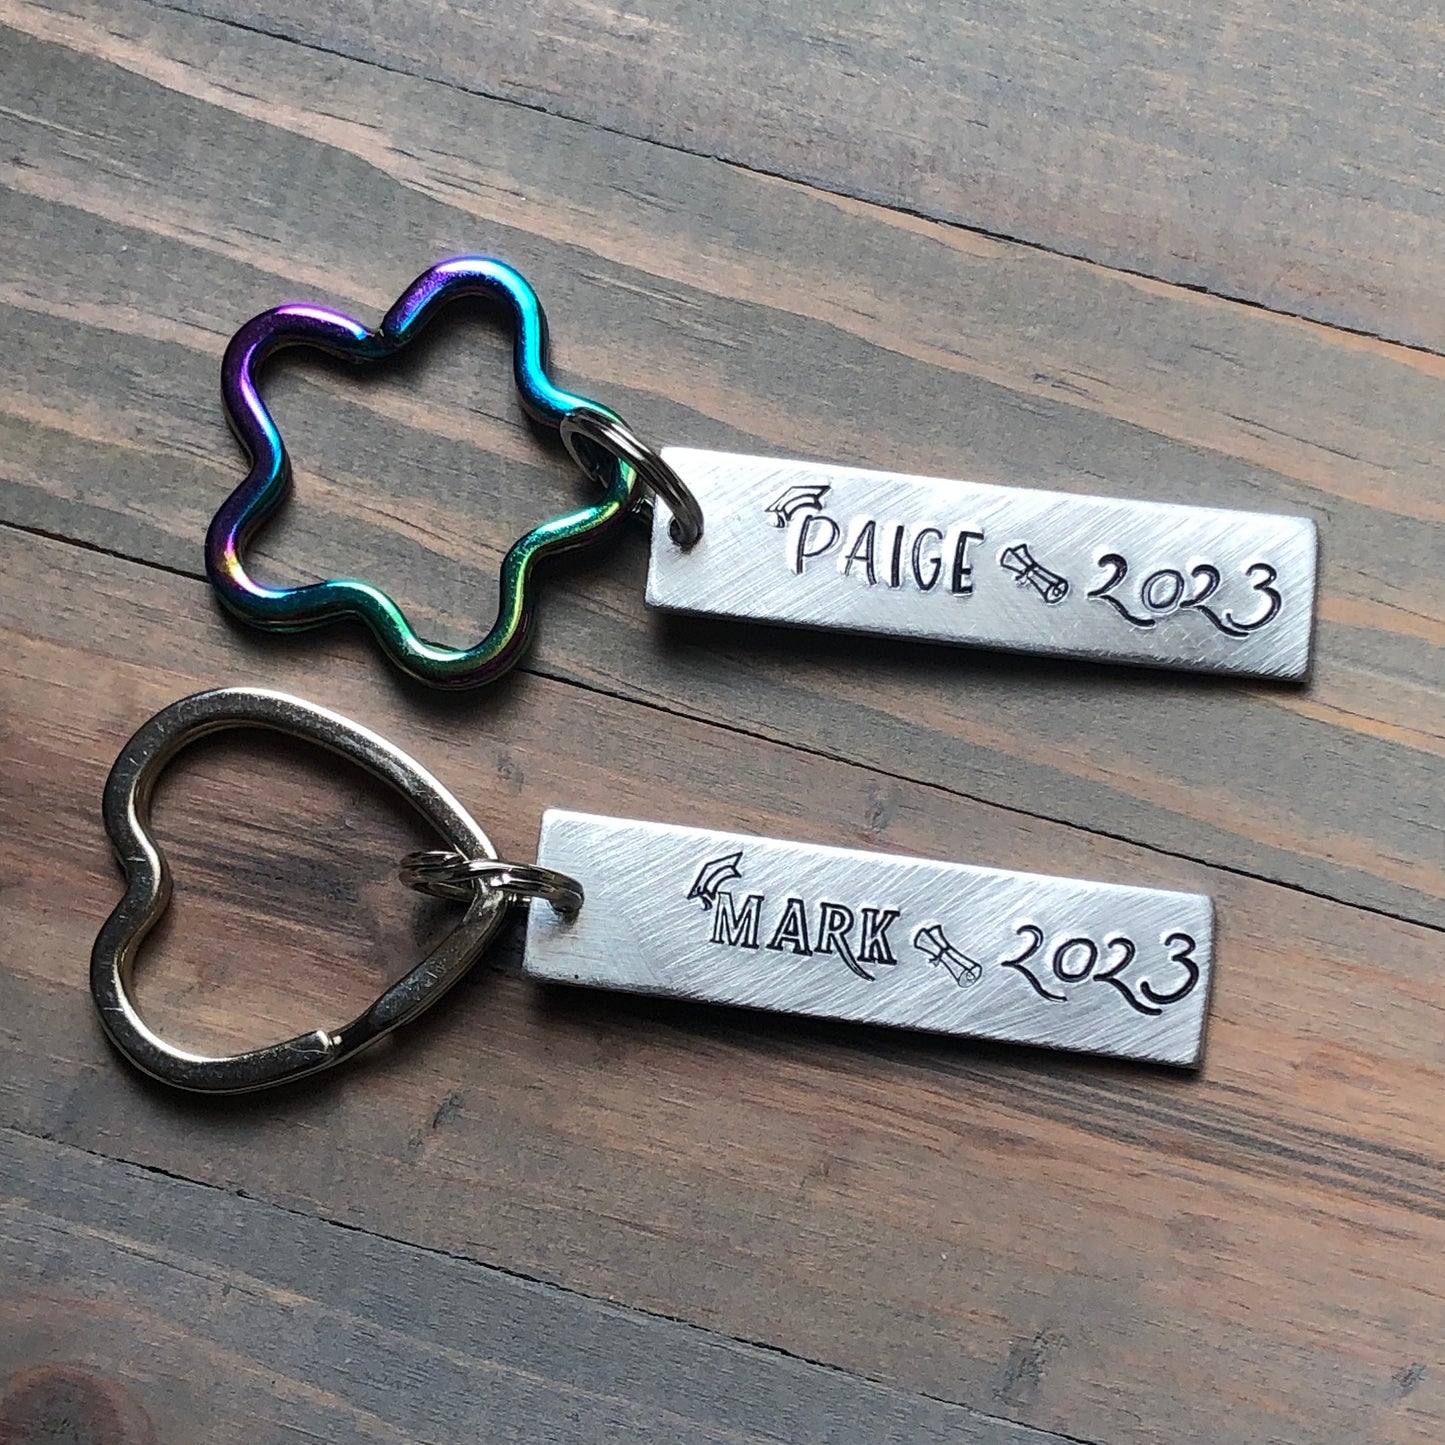 Graduation Gift, Personalized Keychain for Graduation, Class of 2023 Gift, Custom Keychain for Car gift, High School, College